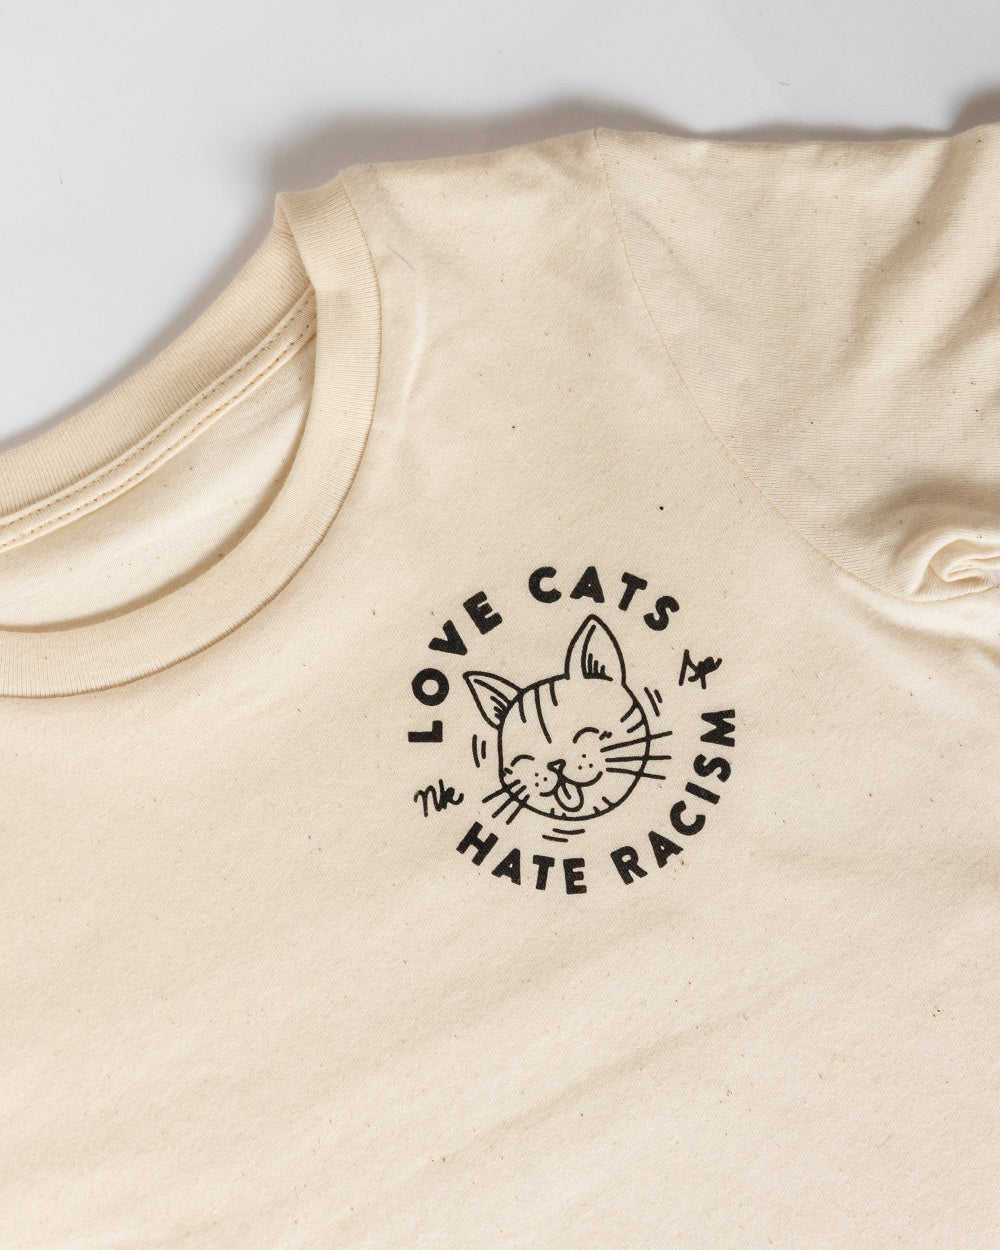 Love Cats Hate Racism Kids T-Shirt